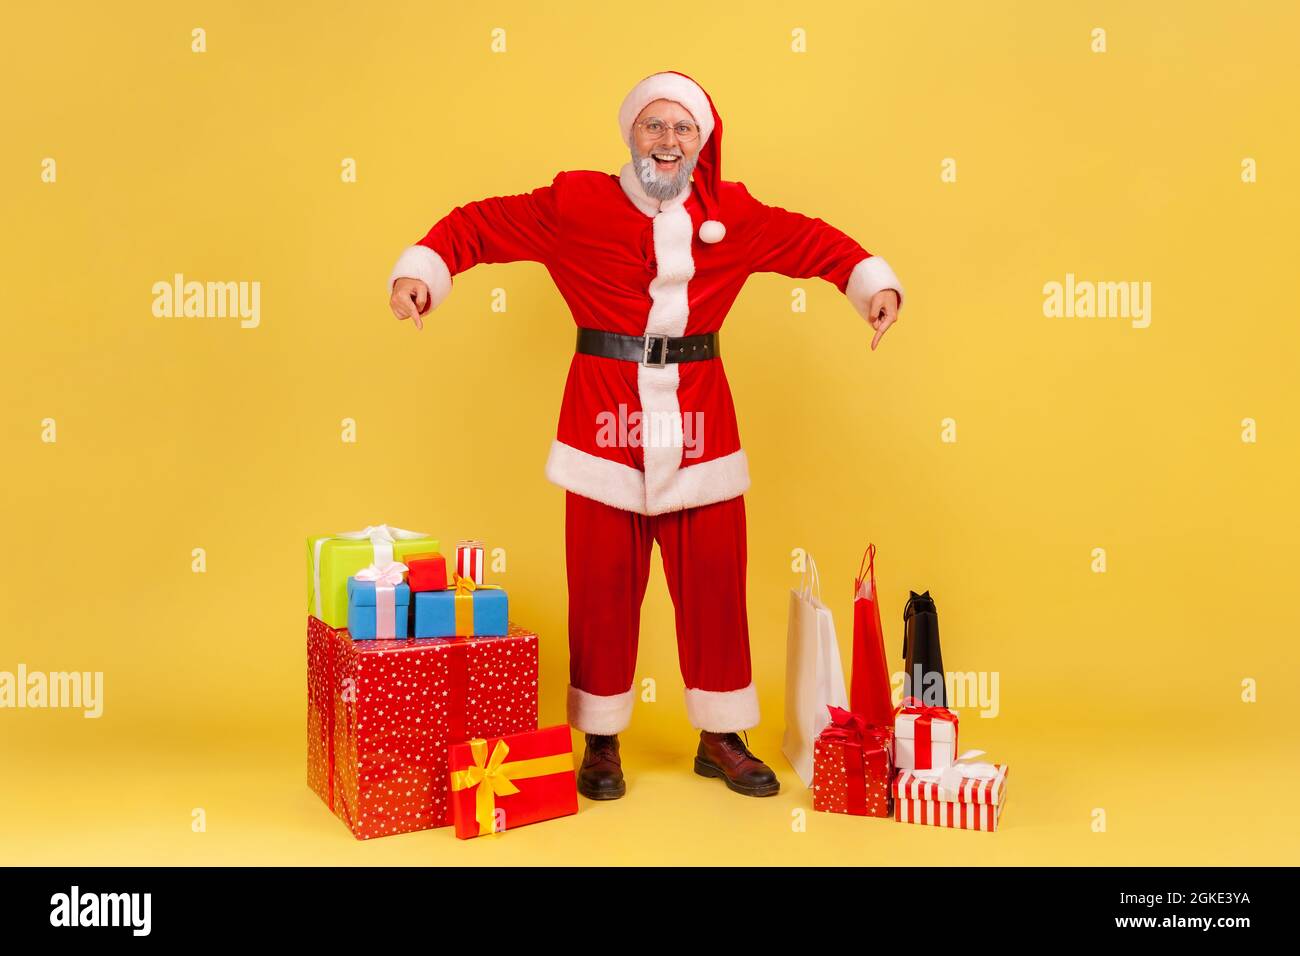 Full length portrait of smiling elderly man with gray beard wearing santa claus costume pointing at many present boxes for Christmas holidays. Indoor Stock Photo